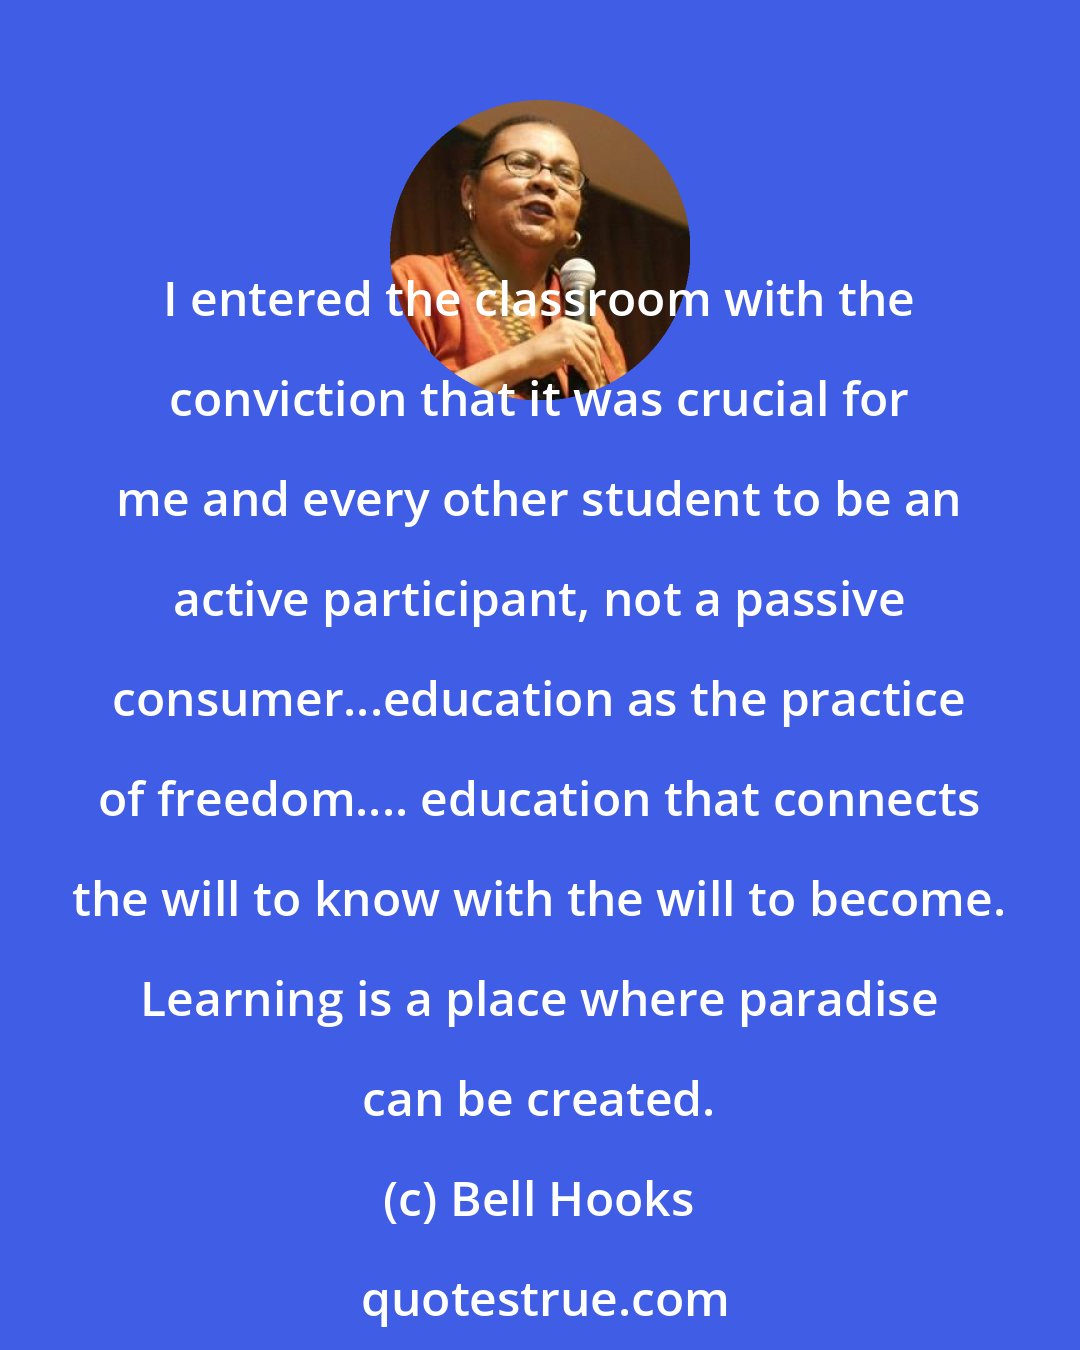 Bell Hooks: I entered the classroom with the conviction that it was crucial for me and every other student to be an active participant, not a passive consumer...education as the practice of freedom.... education that connects the will to know with the will to become. Learning is a place where paradise can be created.